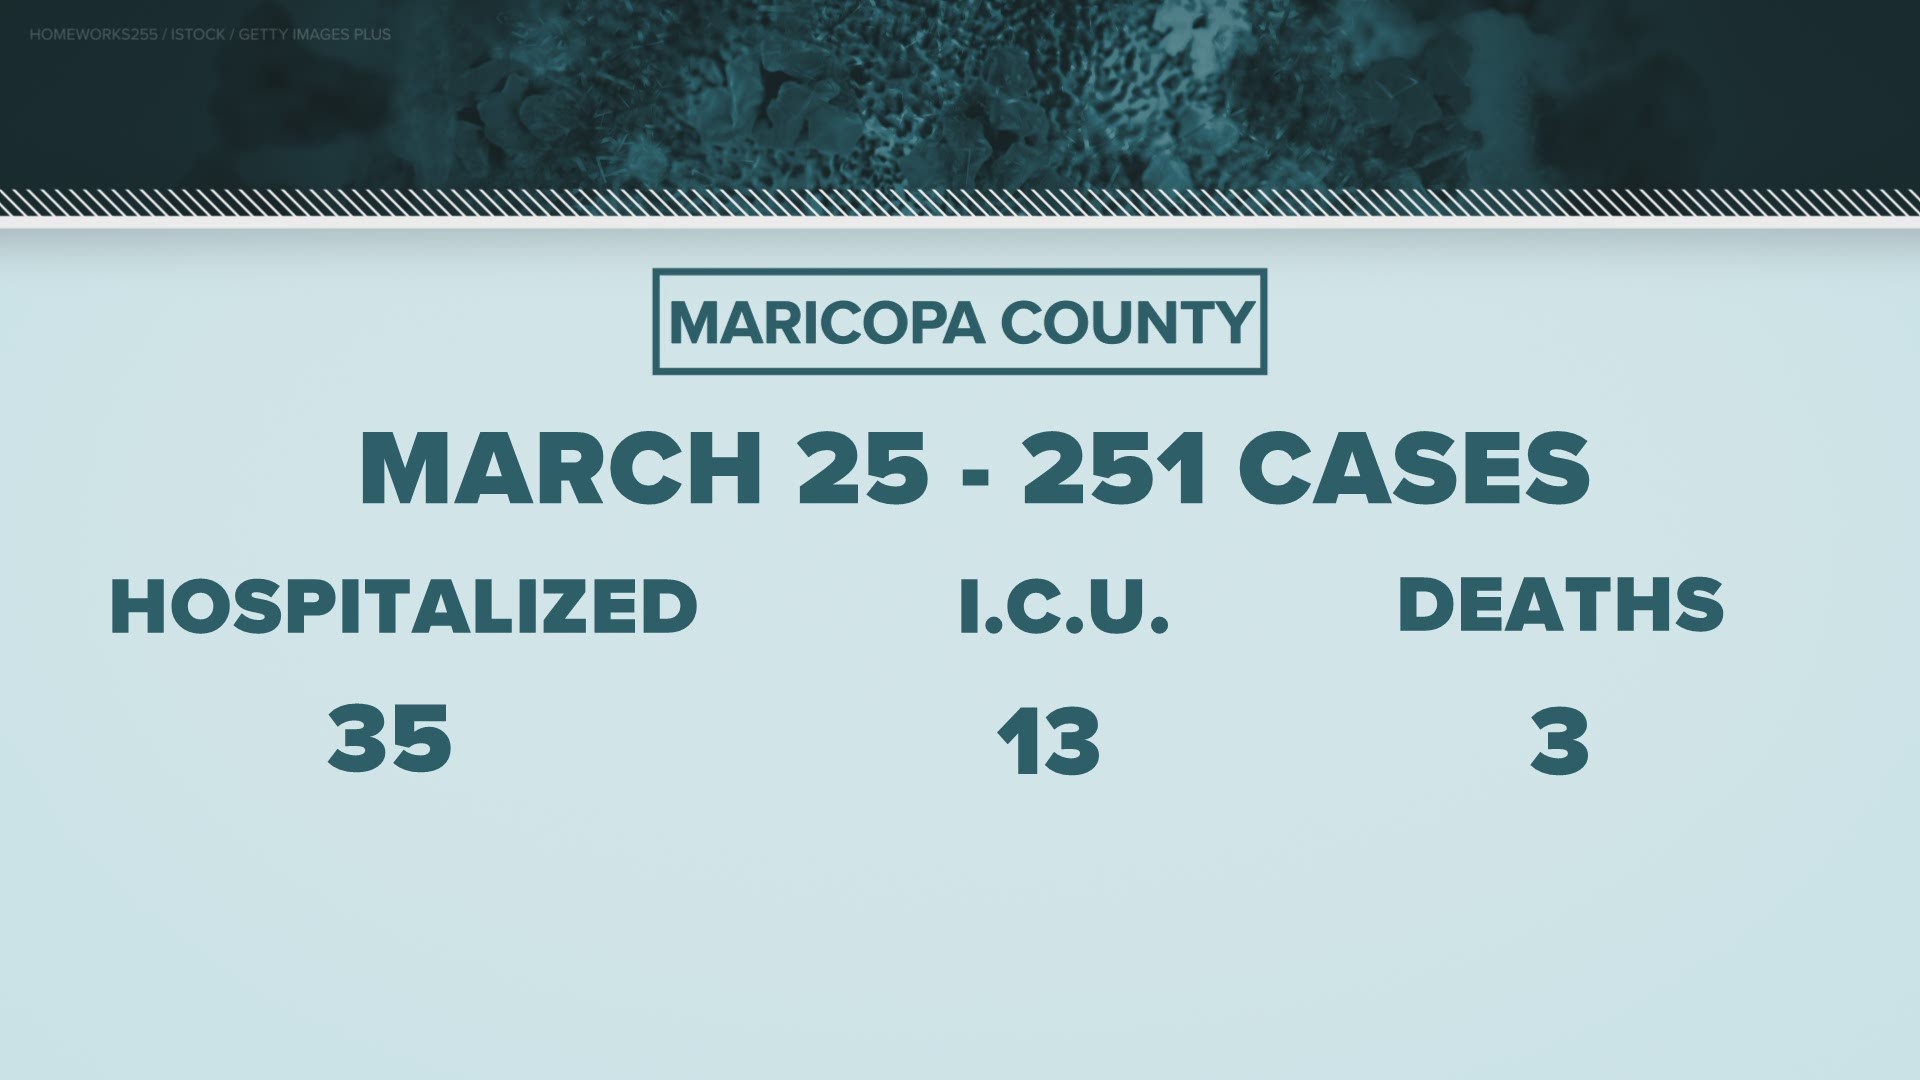 Here's a breakdown of the coronavirus cases in Maricopa County as of Wednesday, March 25.